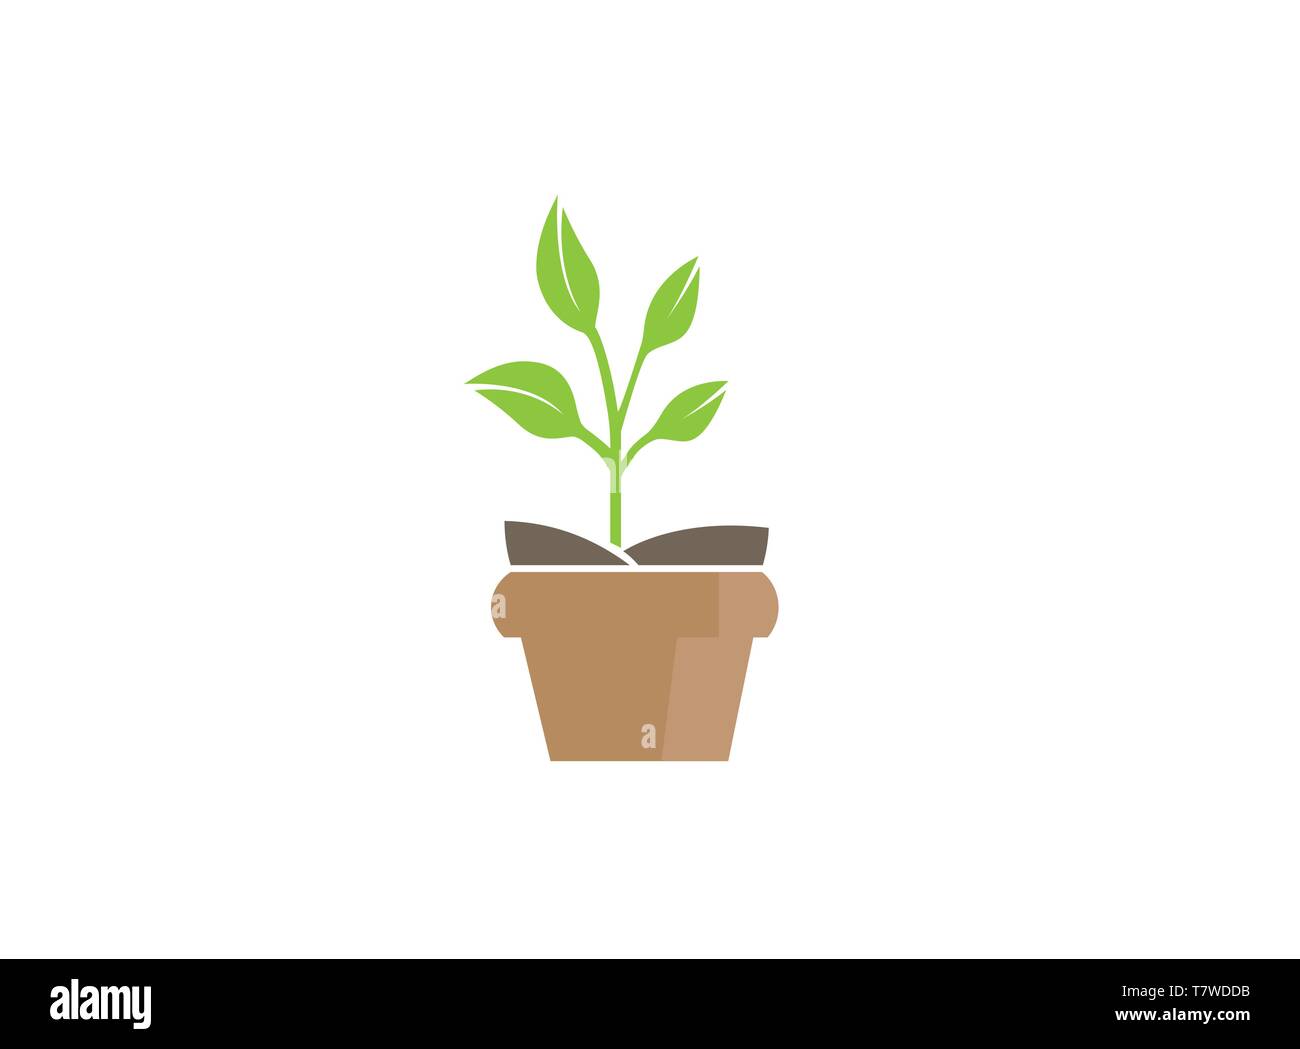 Plant in the Pot with some leaves for logo design Stock Vector